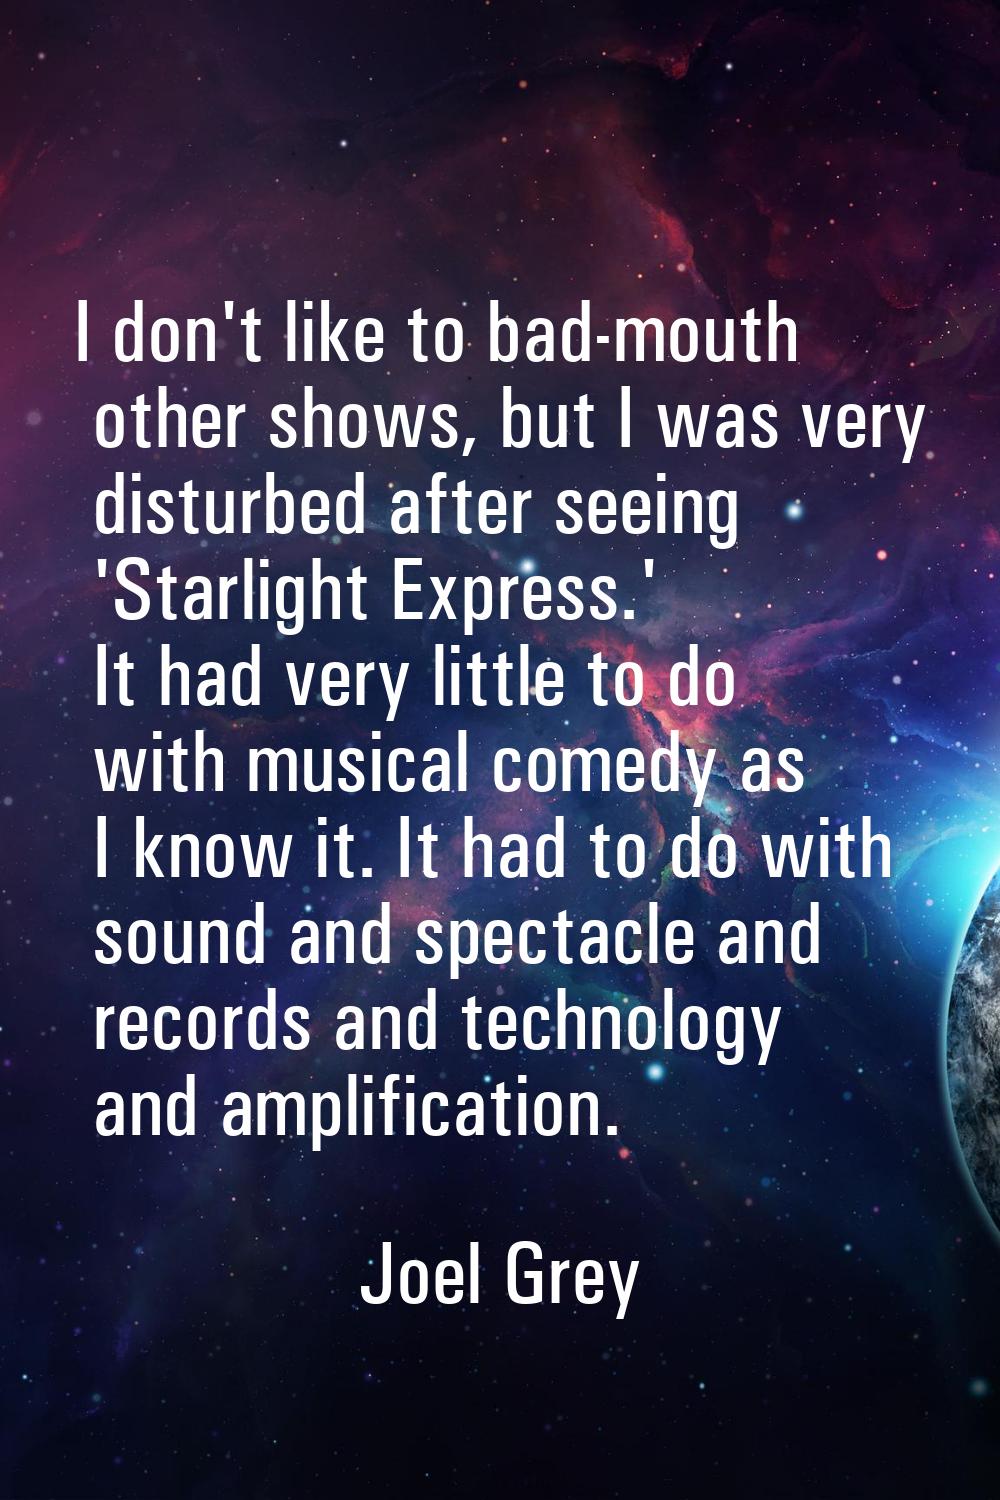 I don't like to bad-mouth other shows, but I was very disturbed after seeing 'Starlight Express.' I